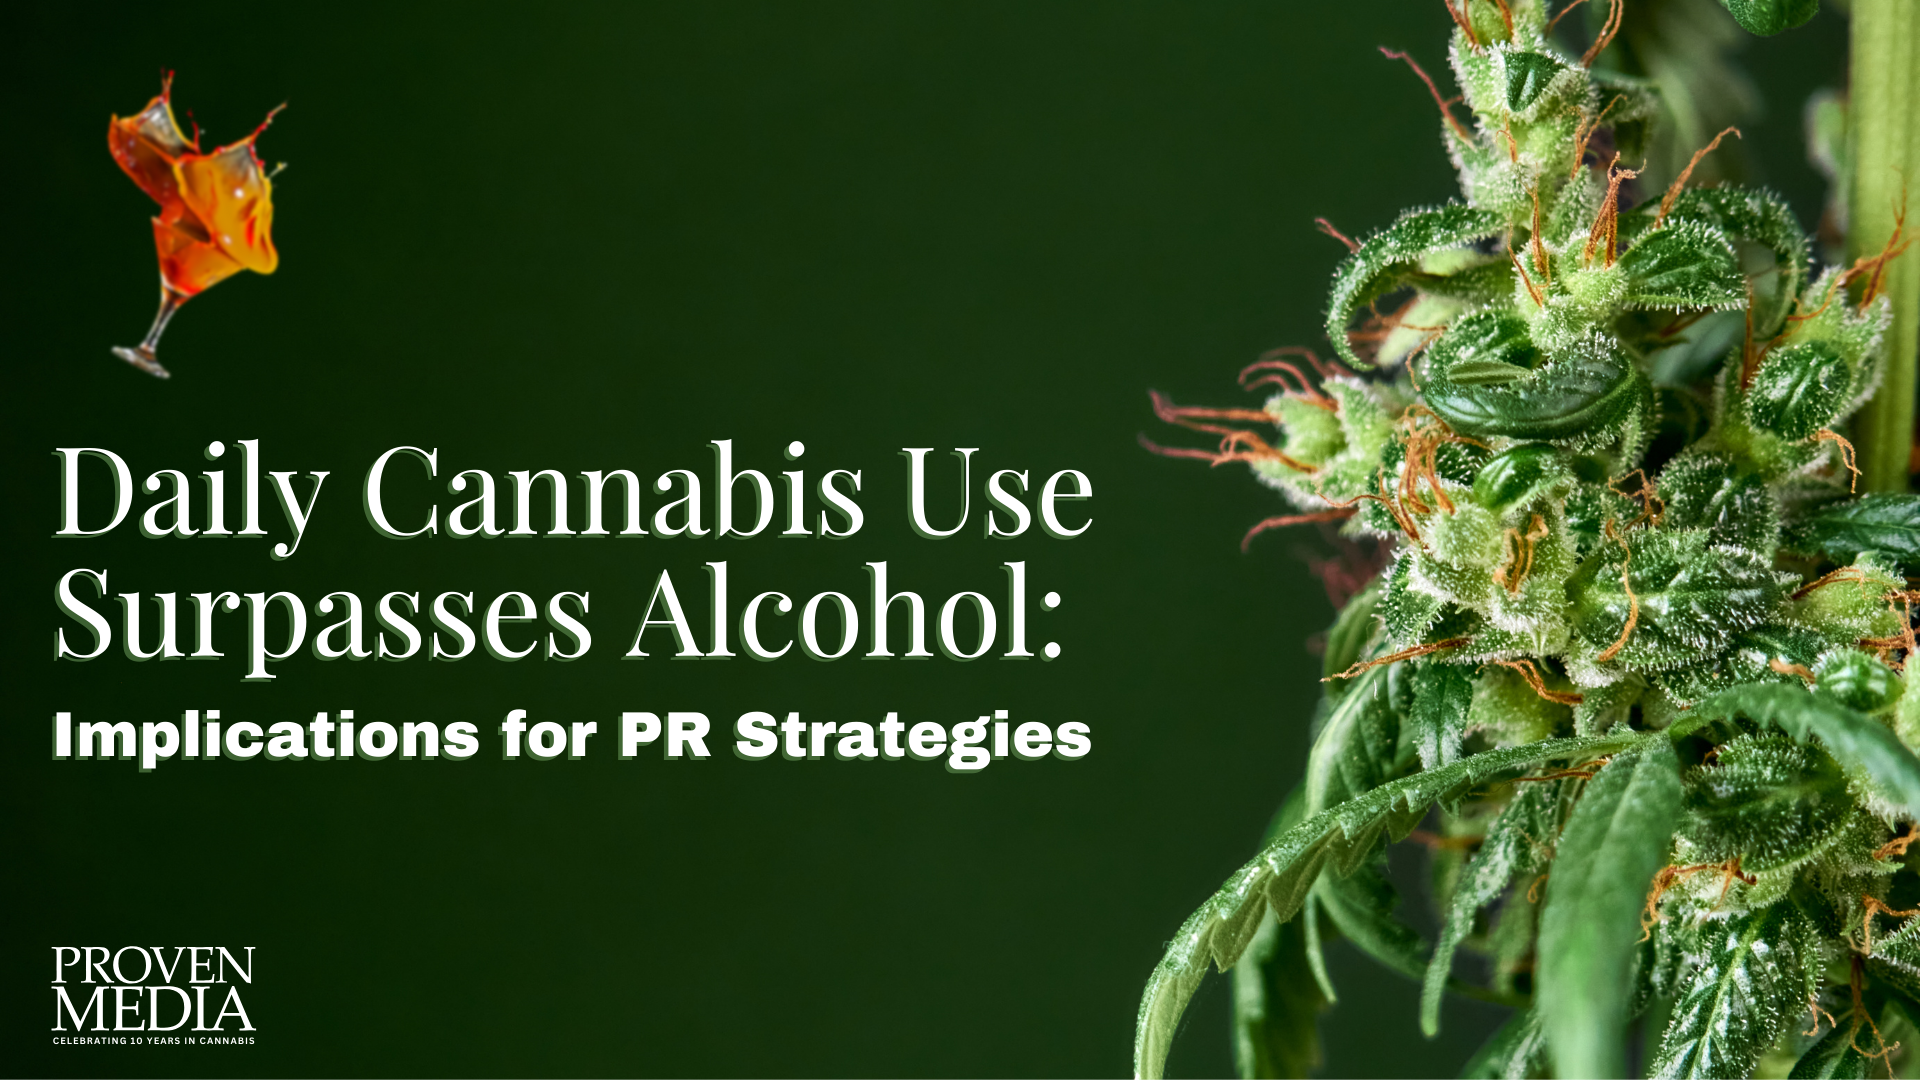 cannabis marketing and PR strategies for shifting cannabis use